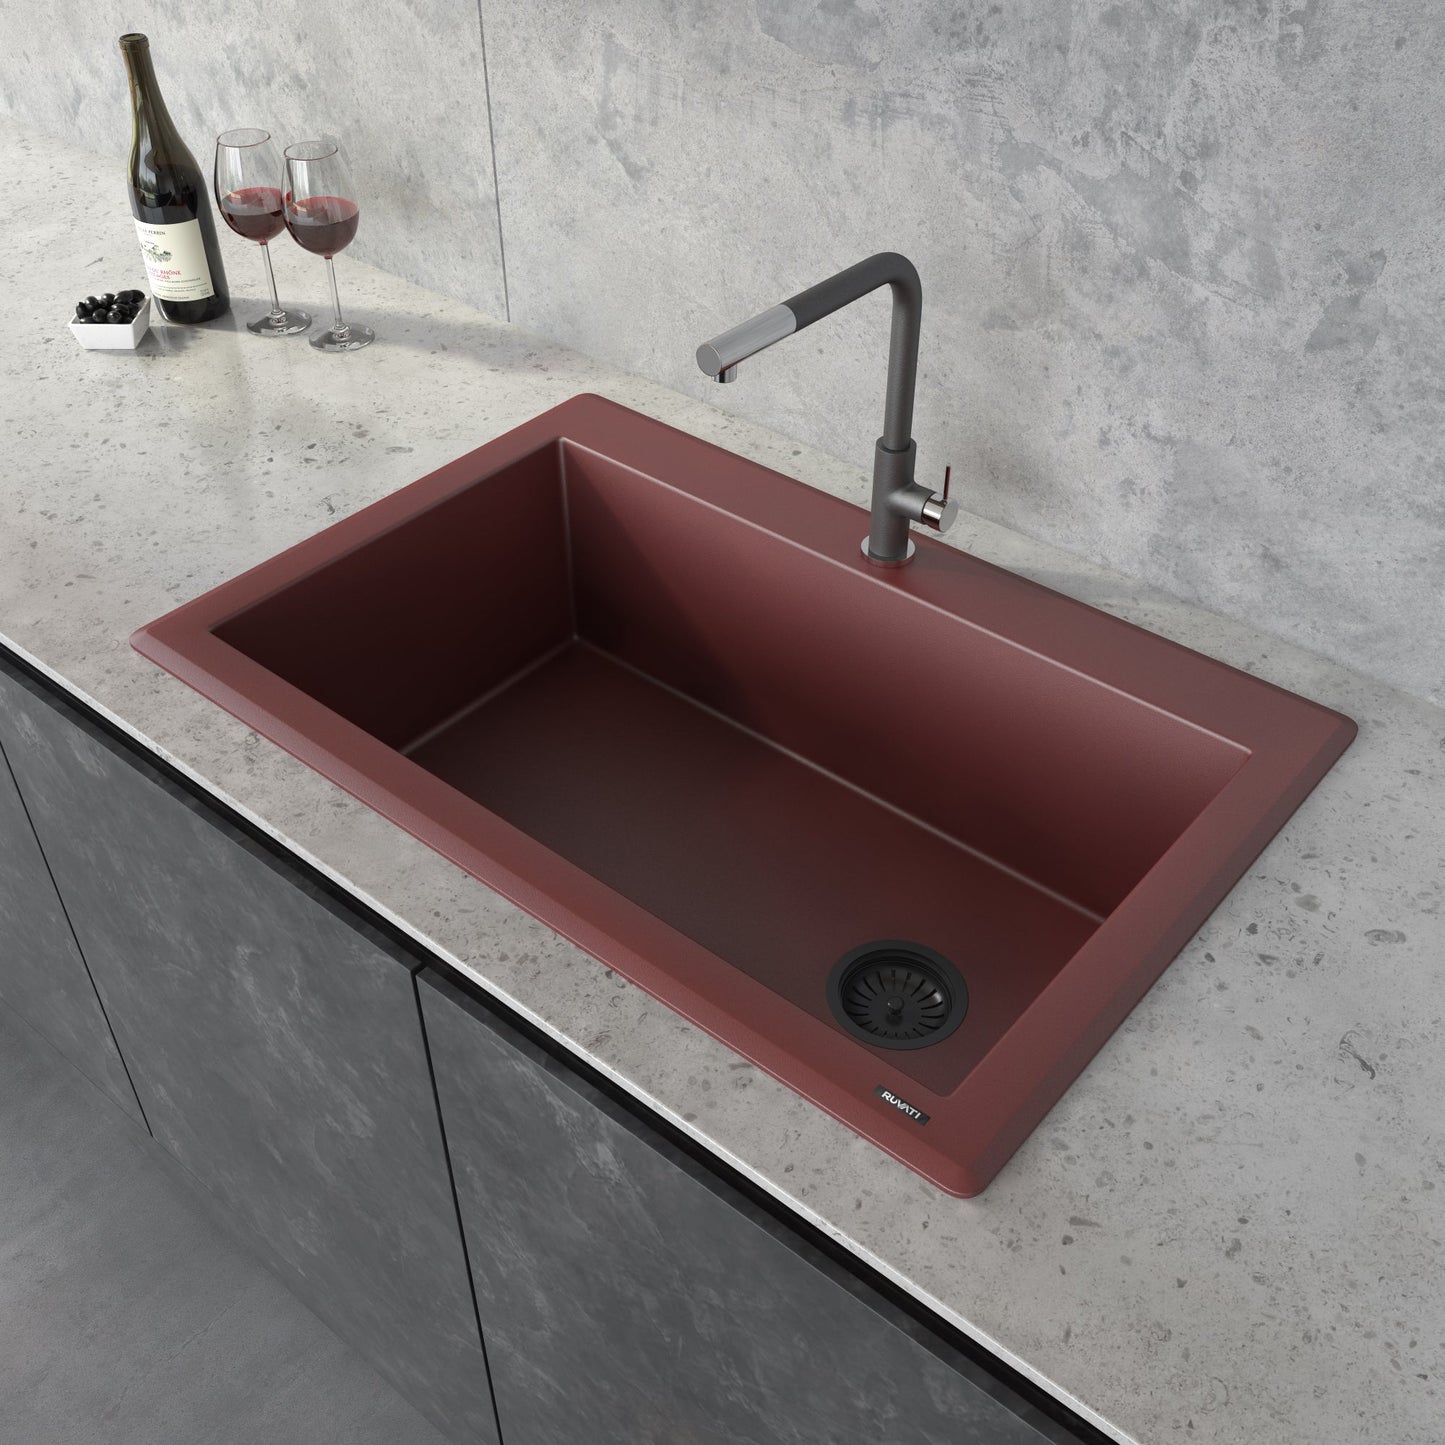 Ruvati epiGranite 33” x 22” Carnelia Red Drop-in Granite Composite Single Bowl Kitchen Sink With Basket Strainer and Drain Assembly